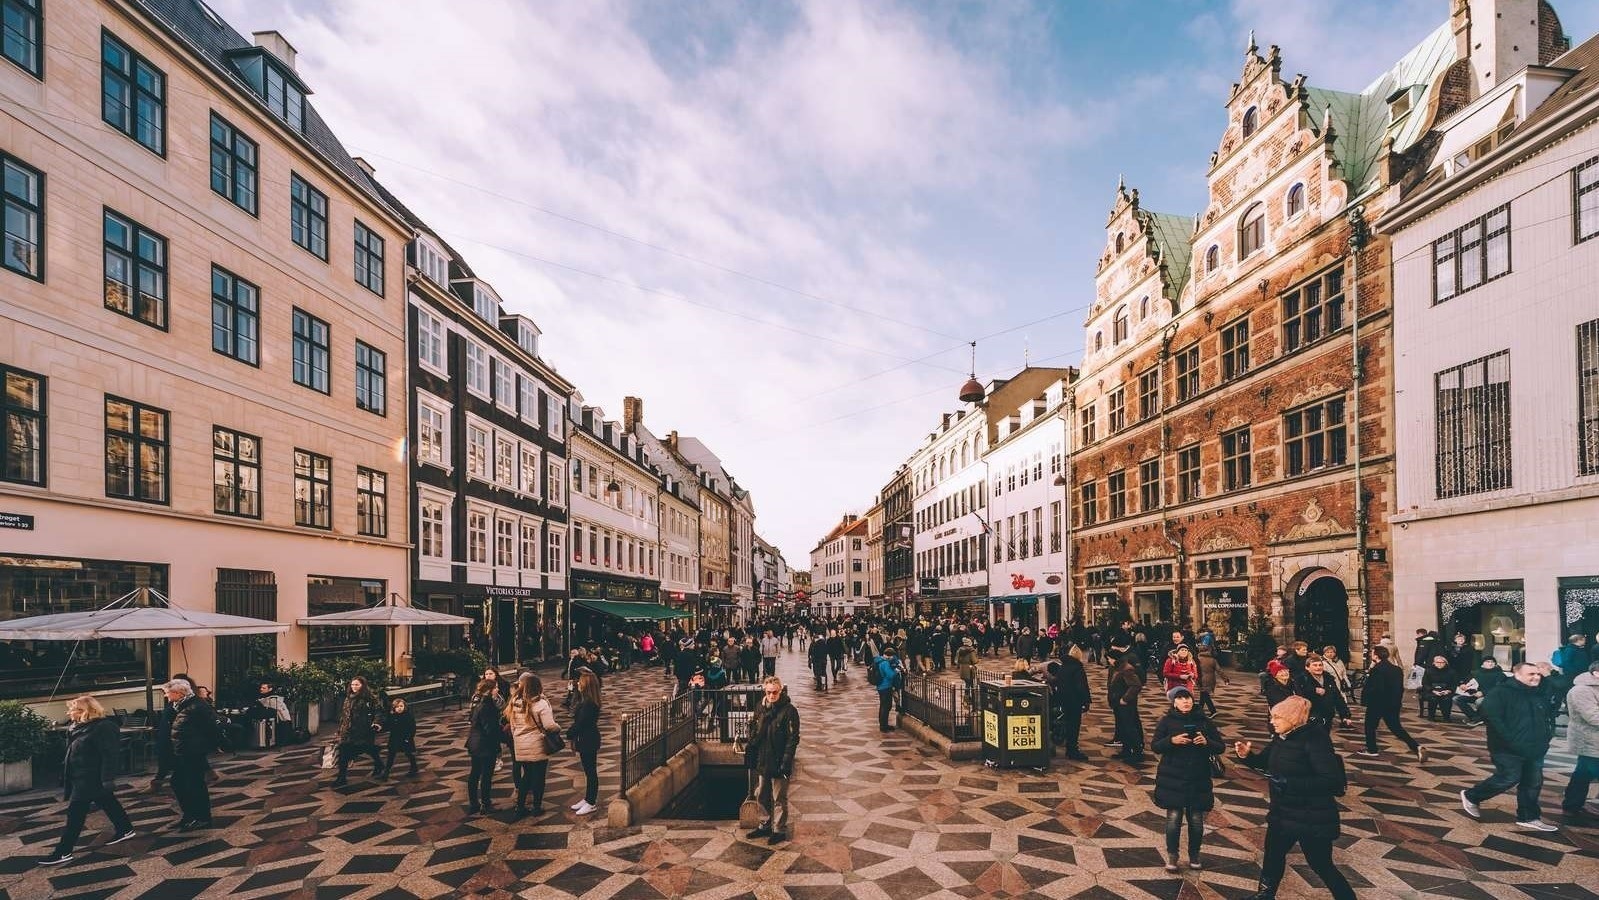 Strøget Shopping District- What to see in Copenhagen in 1 day?